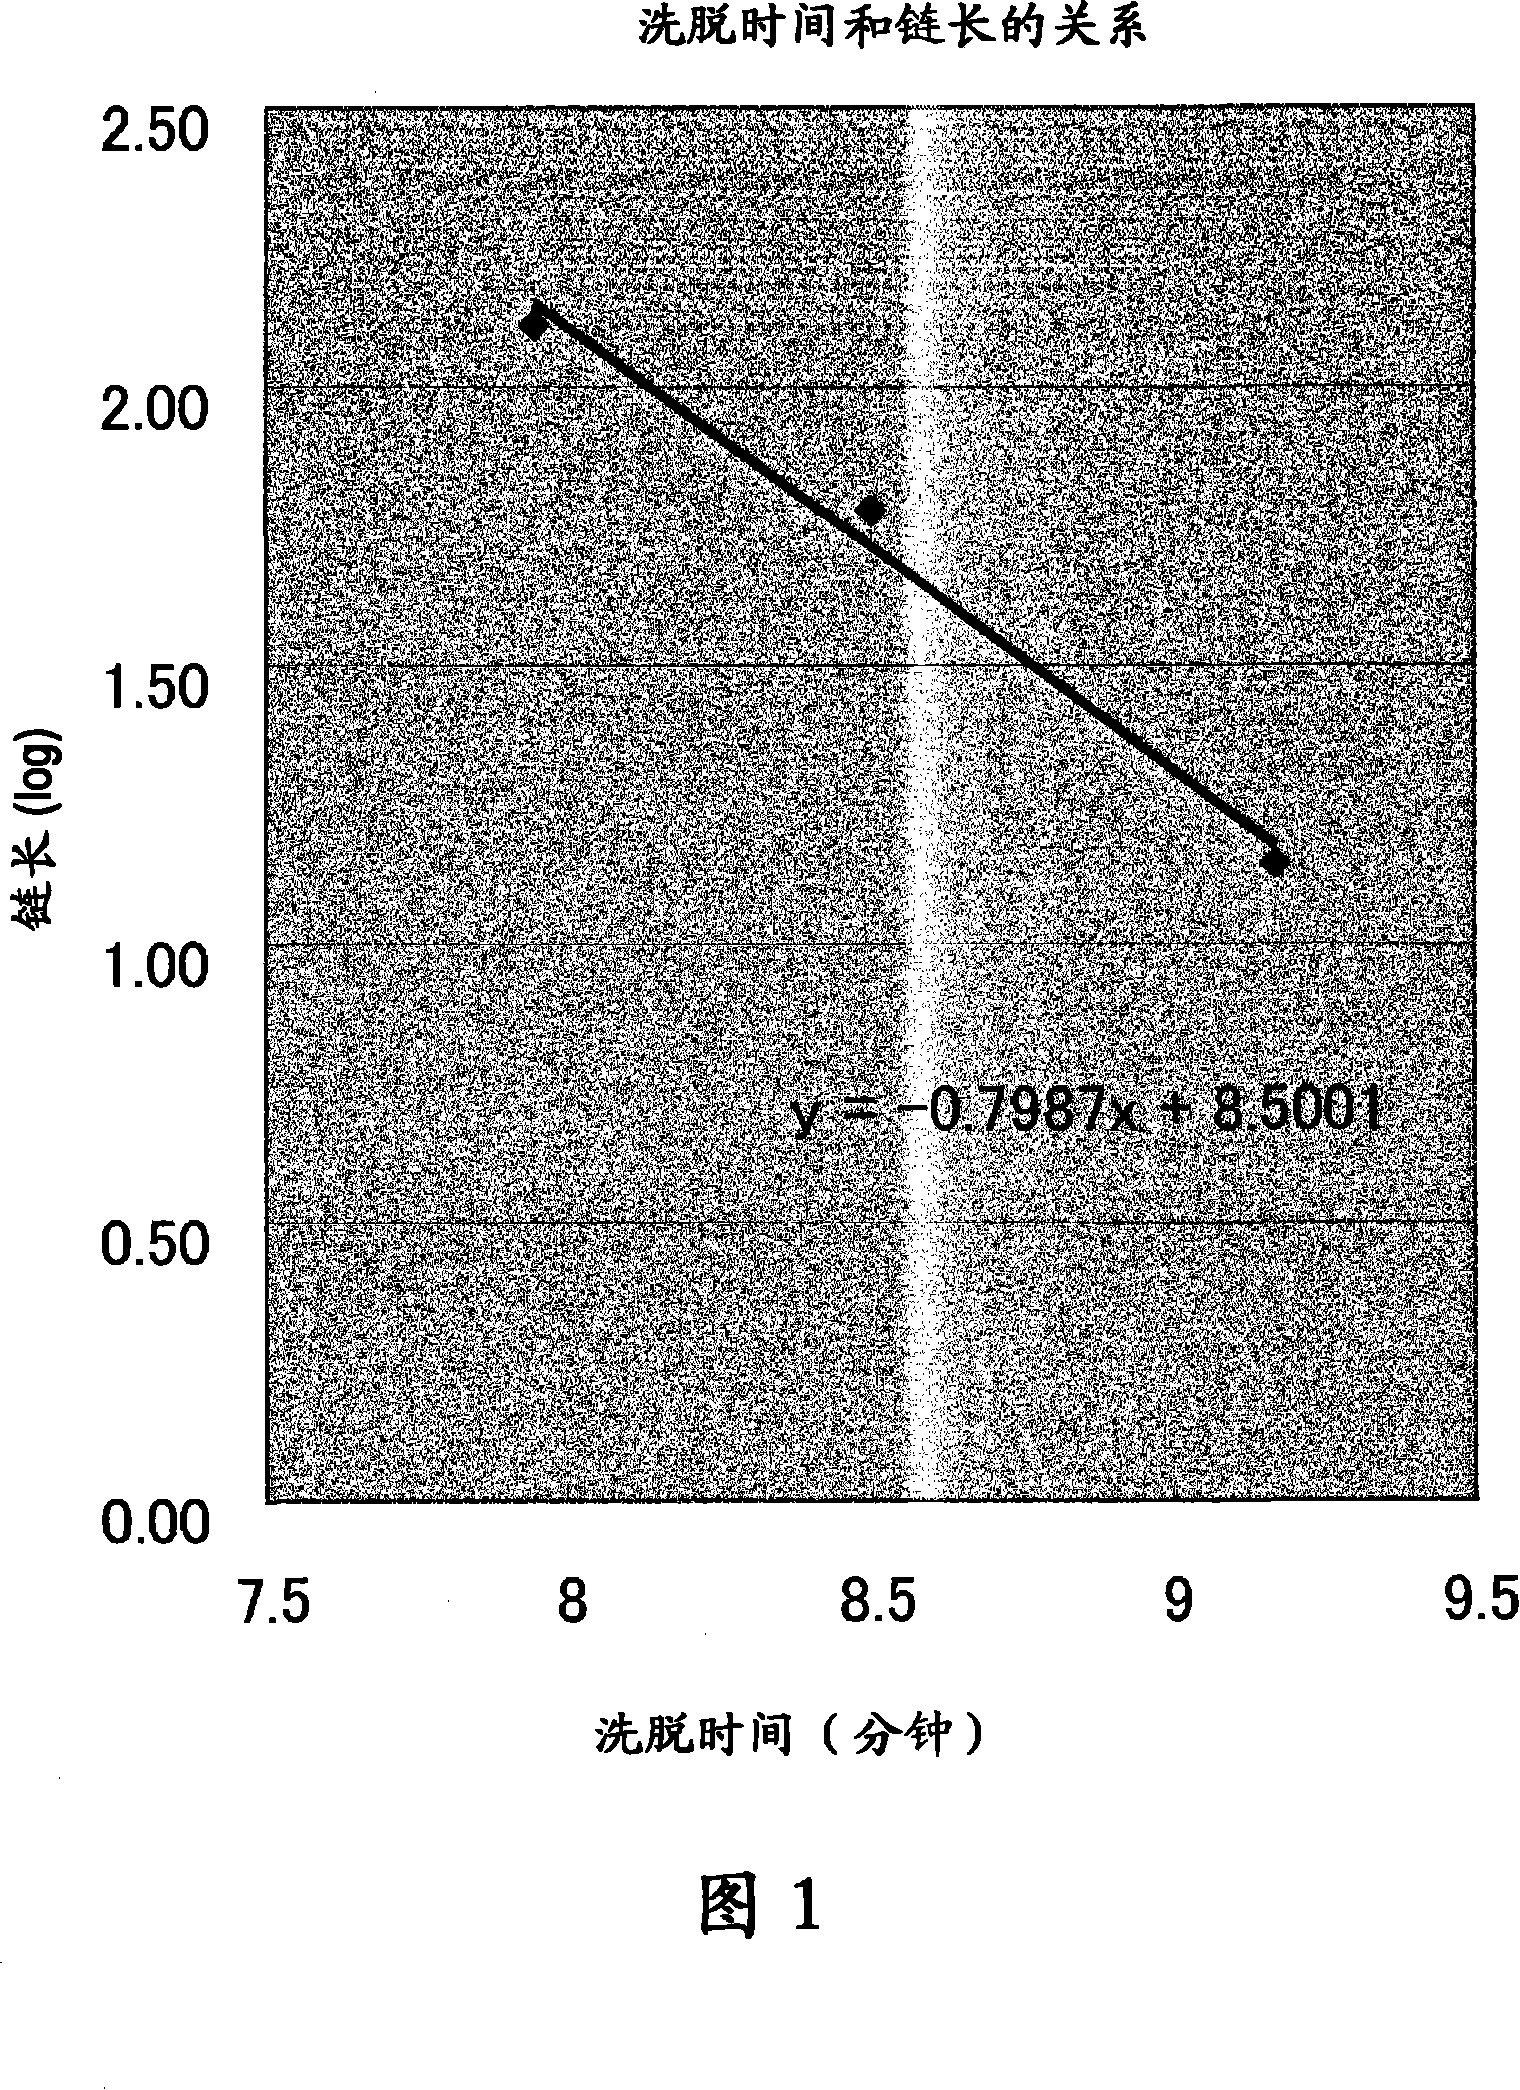 Collagen produced accelerant, dressing material, and method for producing collagen